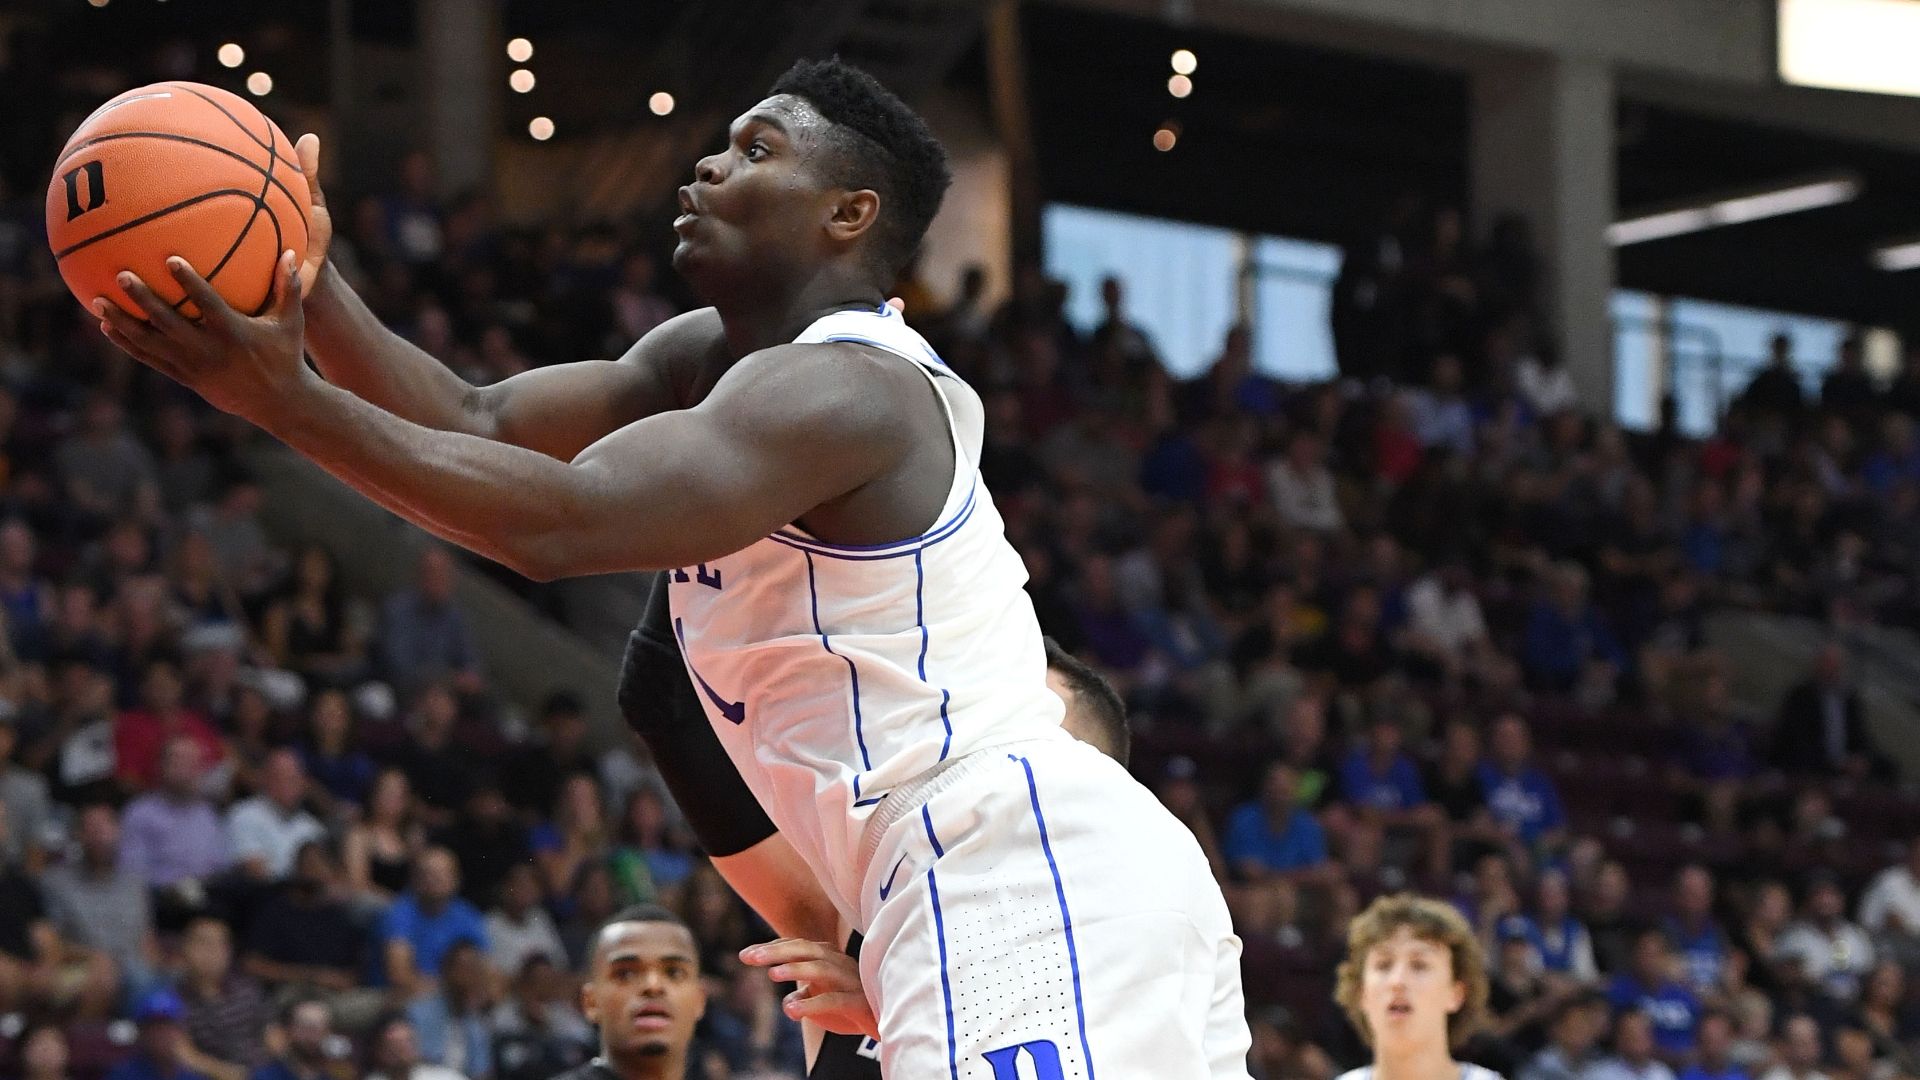 Zion impressive with 29 points in Duke debut - ESPN Video